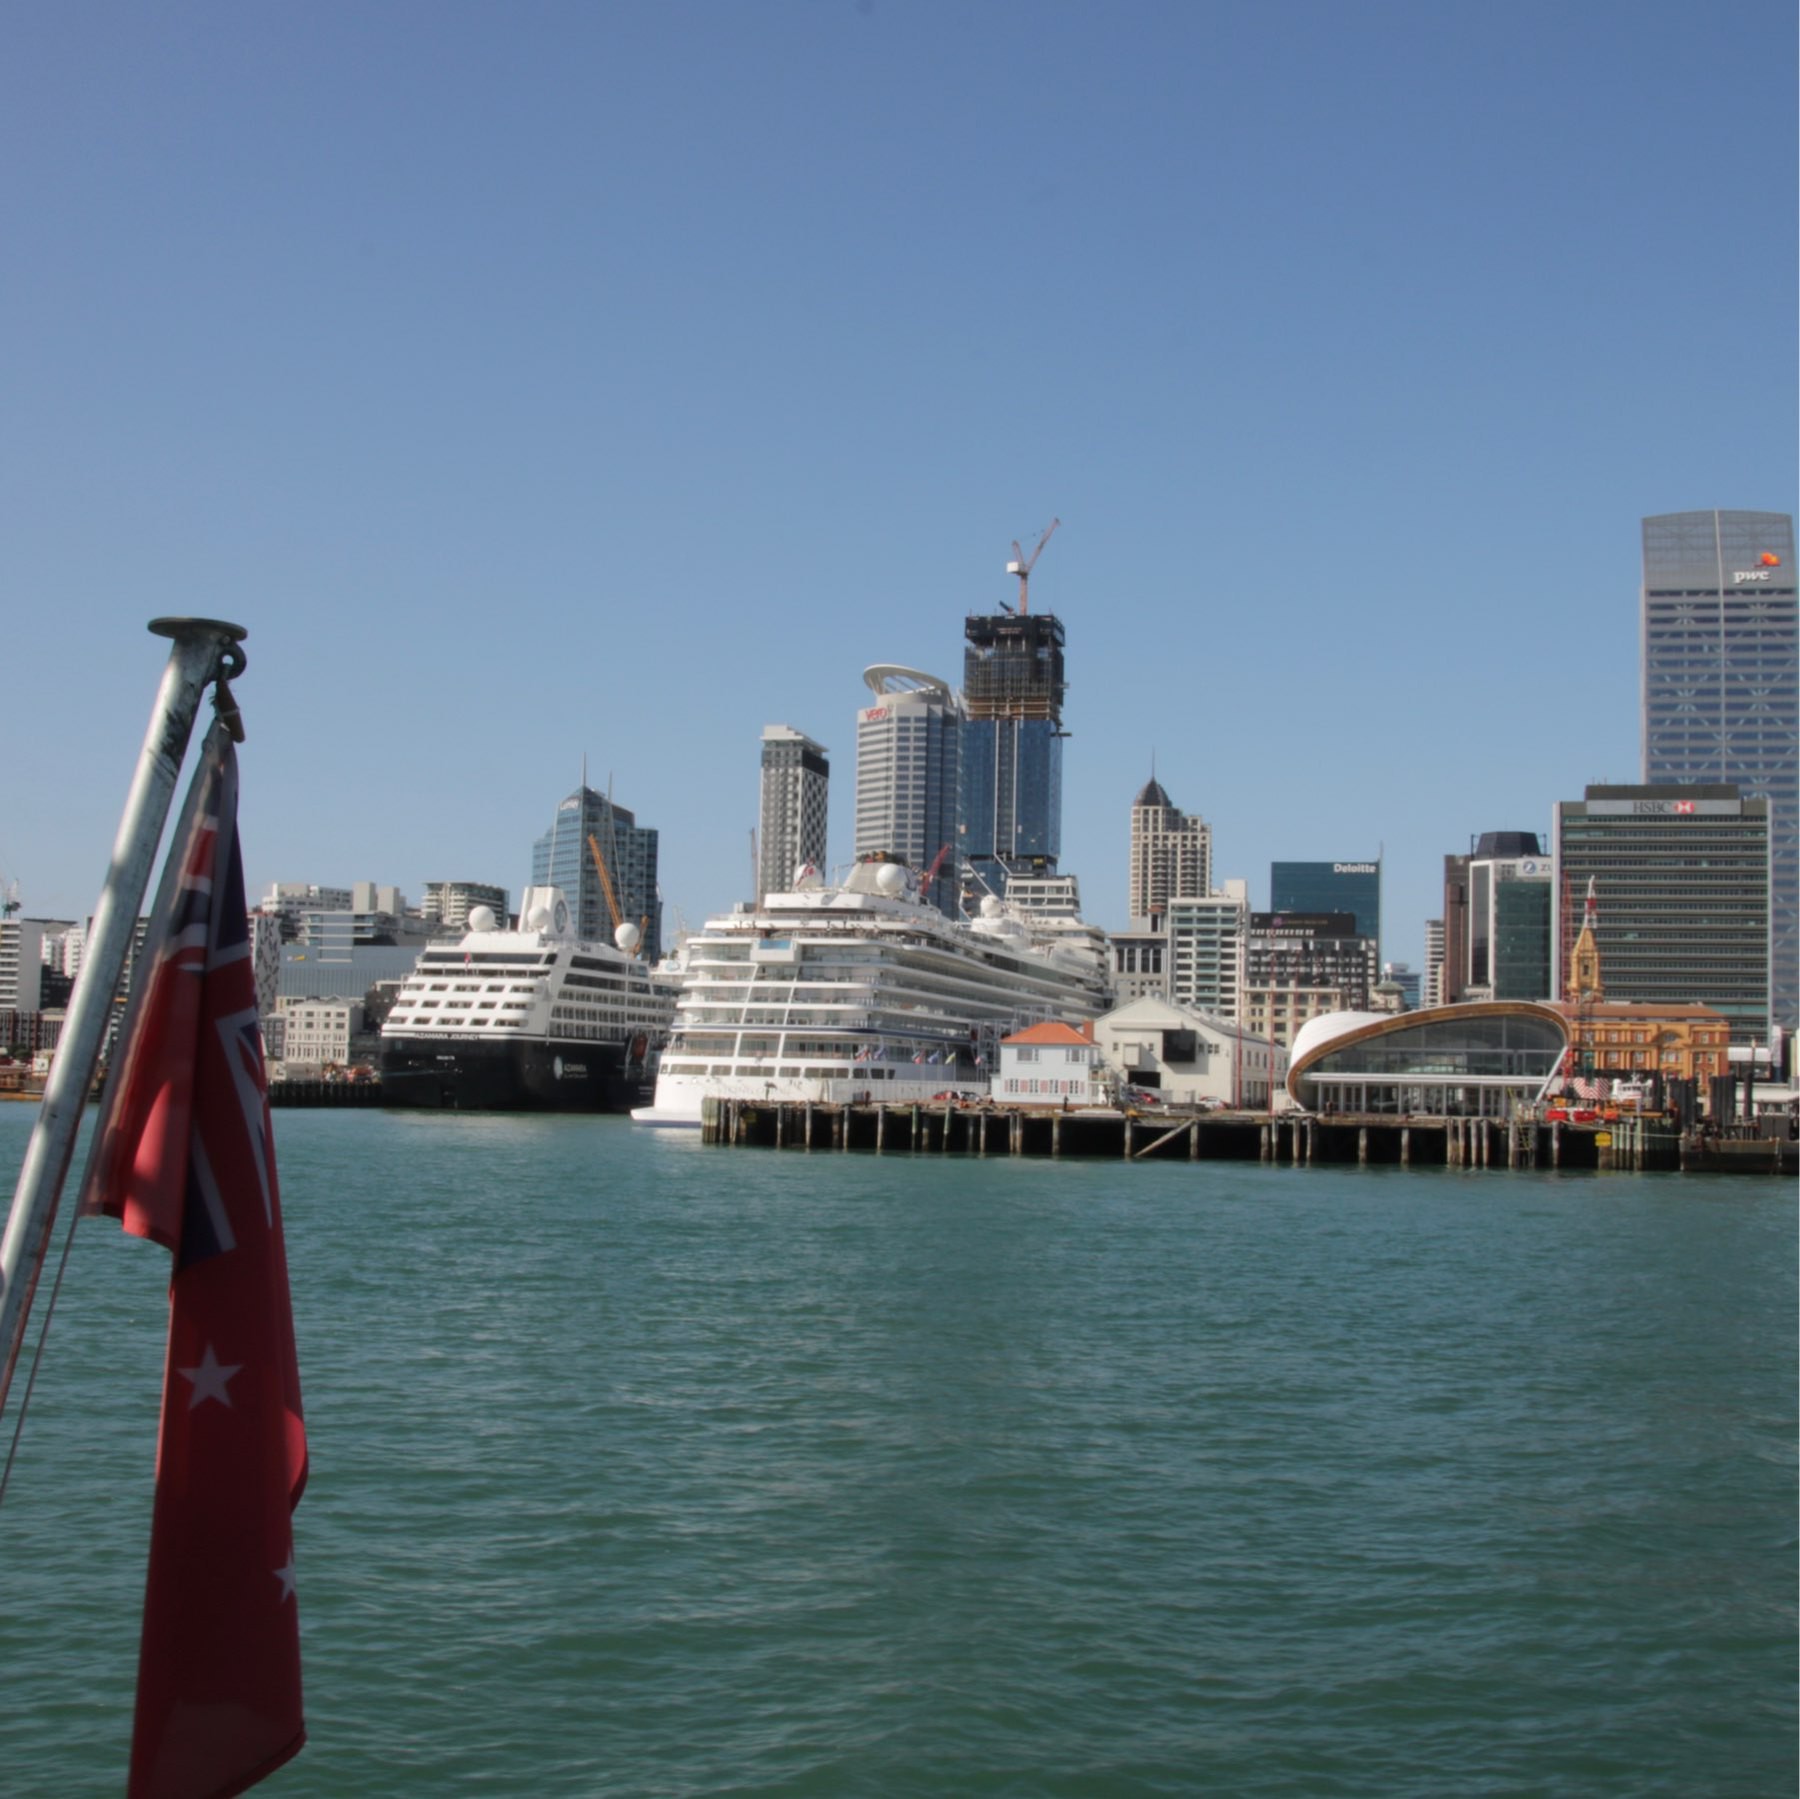 auckland skyline from the water off the cruise ship area